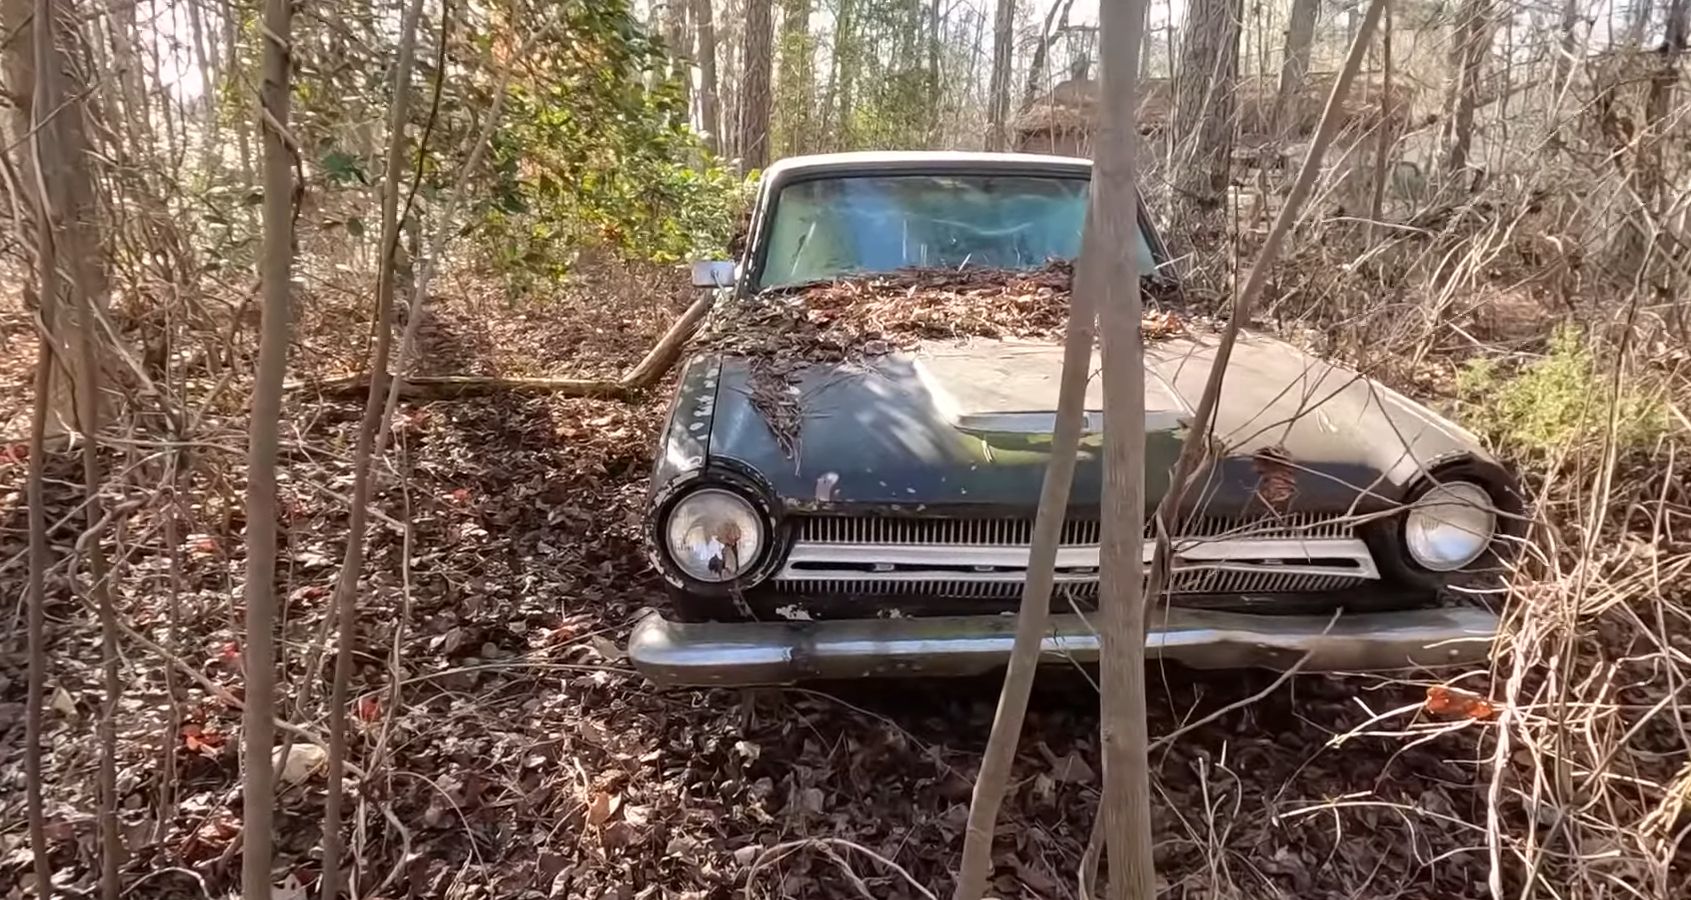 These Rare Muscle Cars Rescued From An Overgrown Yard Have A Bittersweet Story